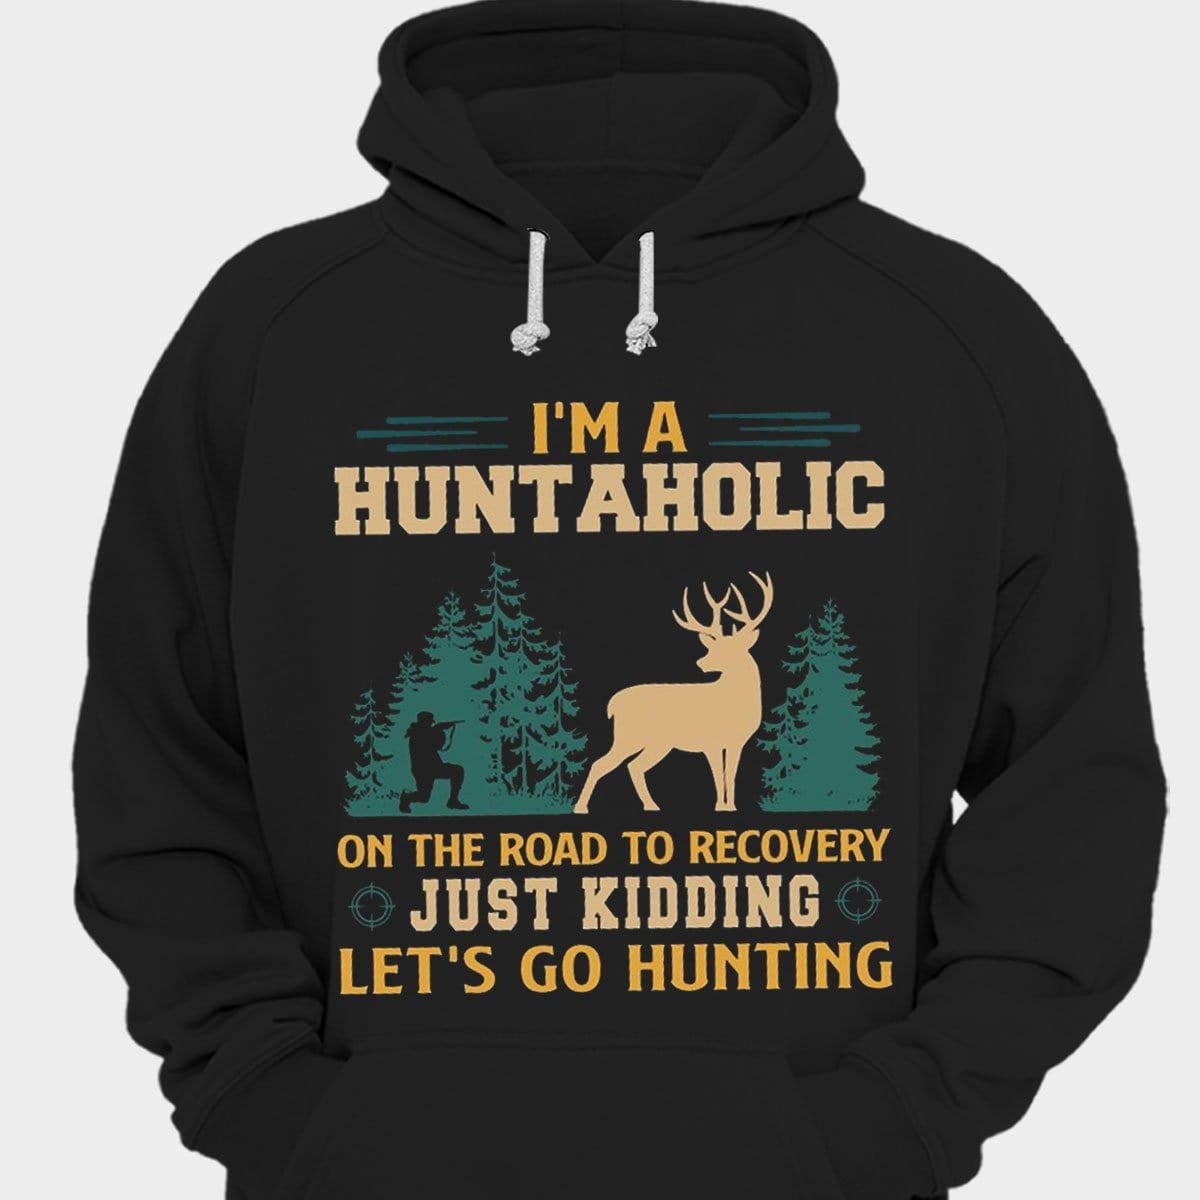 I'm A Huntaholic On The Road To Recovery Hunting Shirts